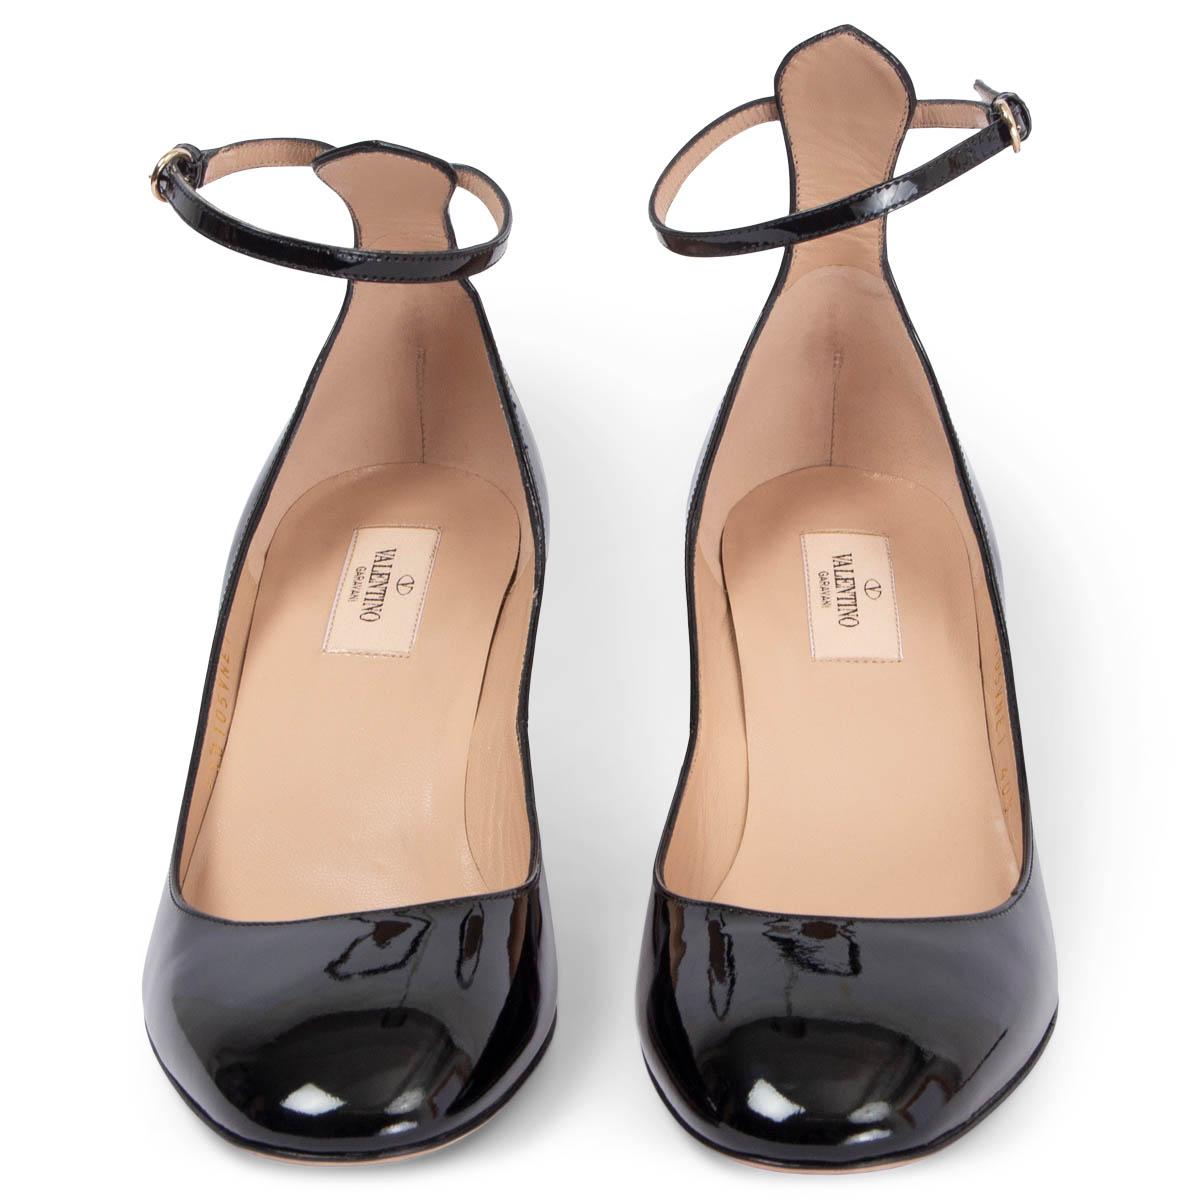 100% authentic Valentino Tan-Go ankle-strap block-heel pumps in black patent leather with patent leather-covered block heel. Have been worn once inside and are in virtually new condition. 

Measurements
Imprinted Size	40.5
Shoe Size	40.5
Inside